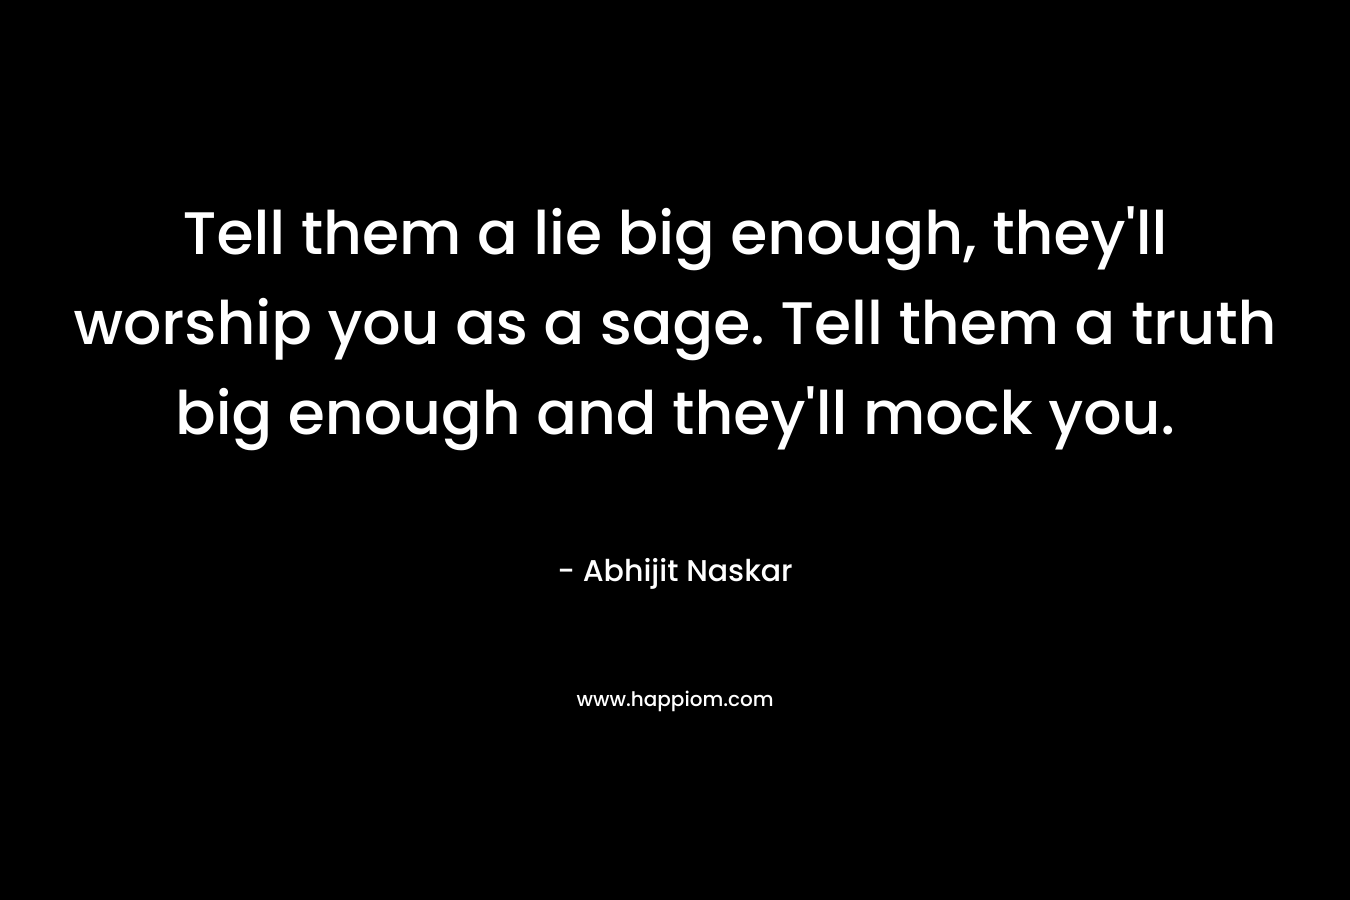 Tell them a lie big enough, they'll worship you as a sage. Tell them a truth big enough and they'll mock you.